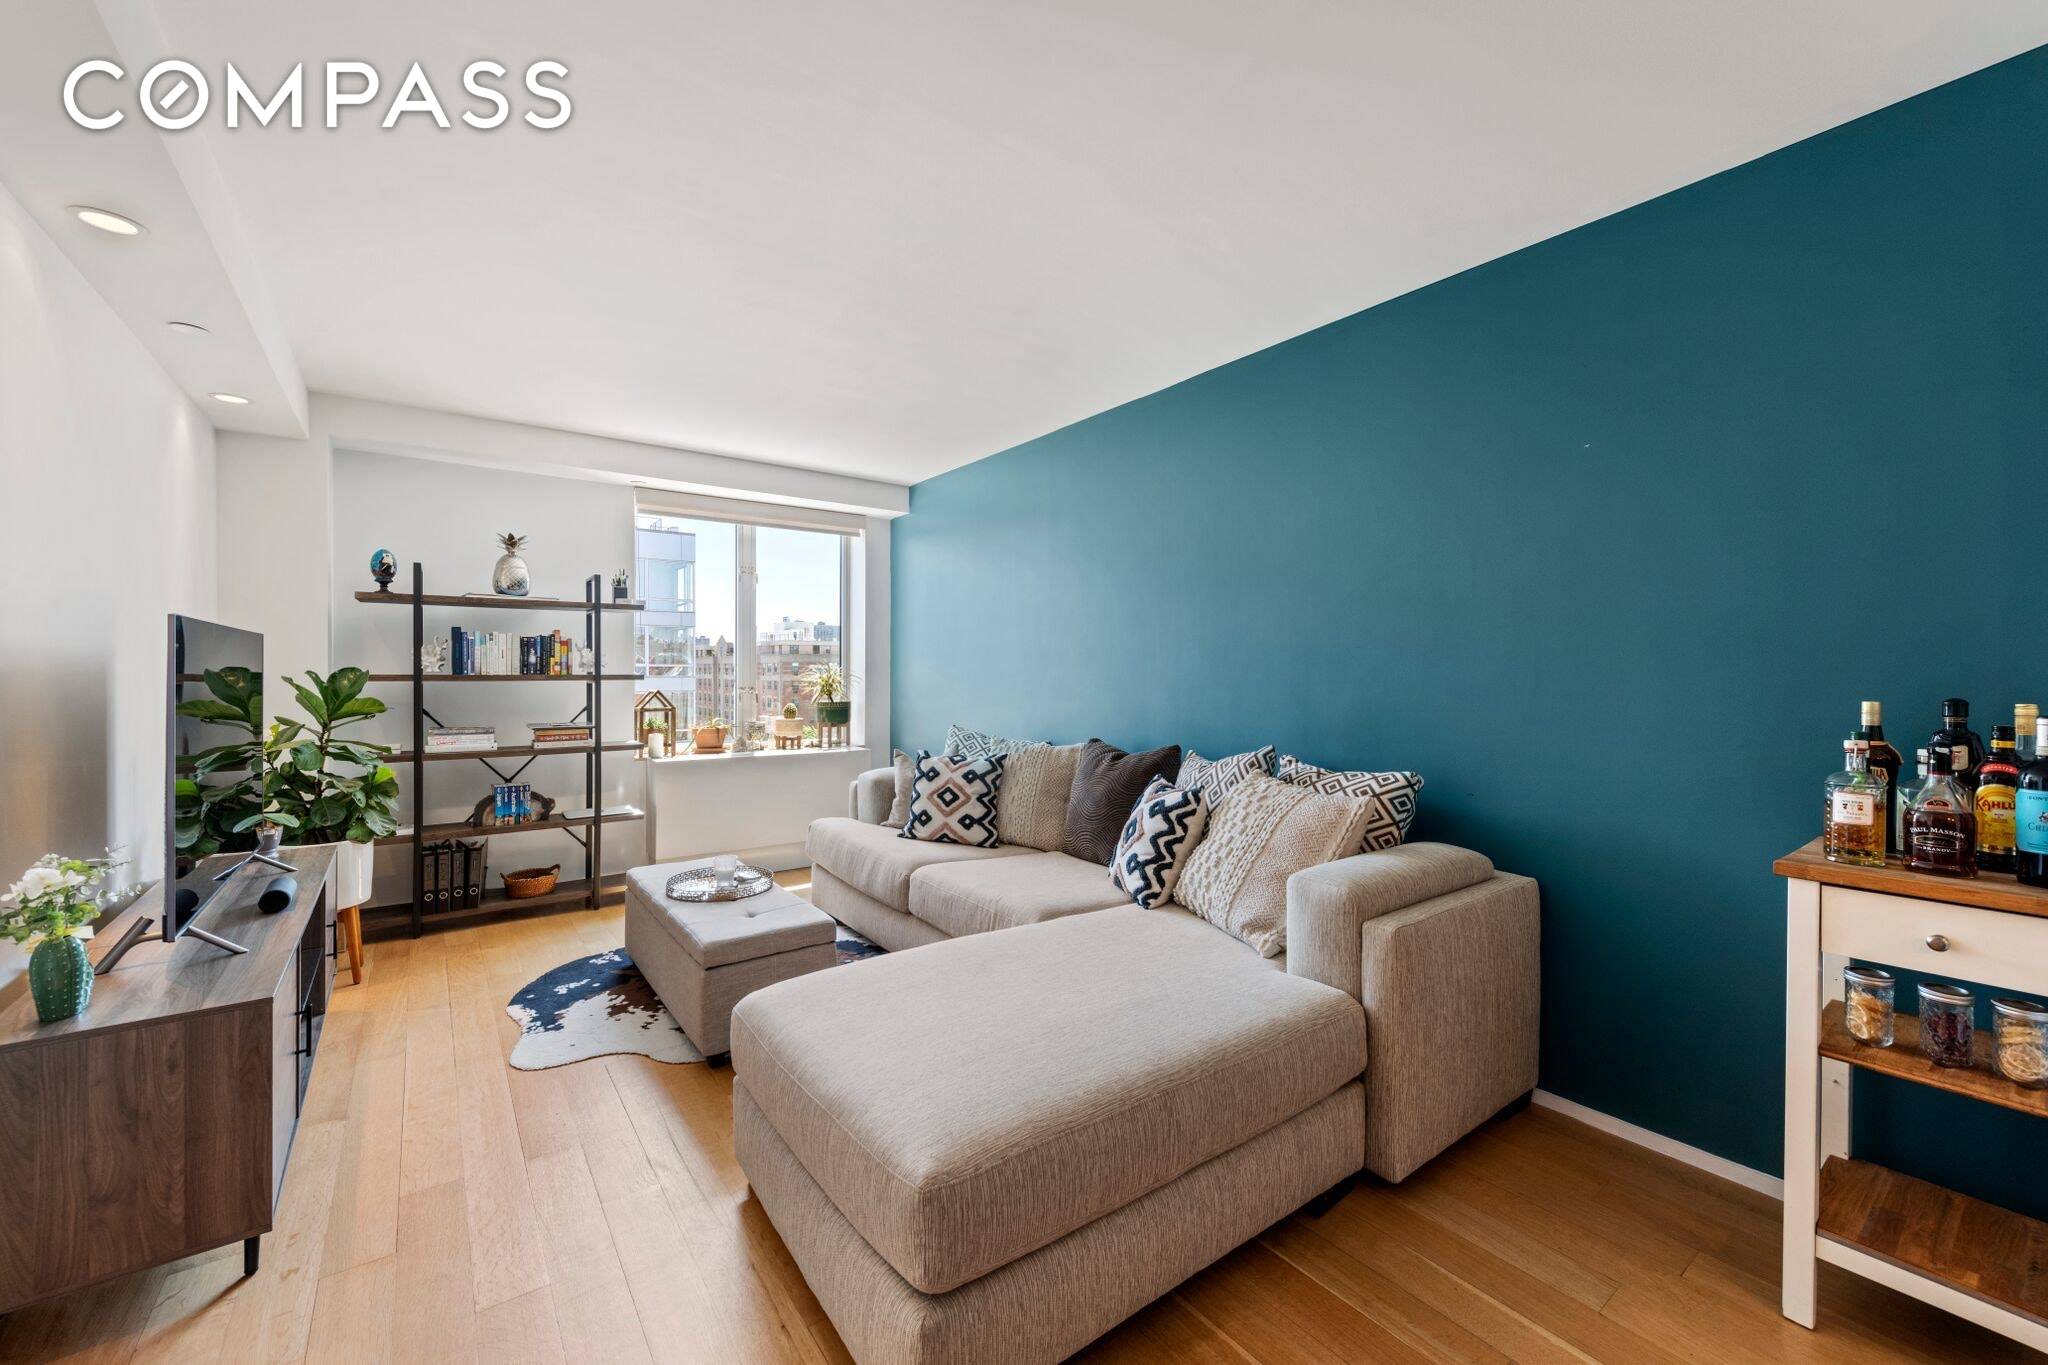 Offering the perfect opportunity for investors, this stunning one bedroom, one bathroom condominium features premium finishes and excellent amenities in the ideal Central Harlem location.